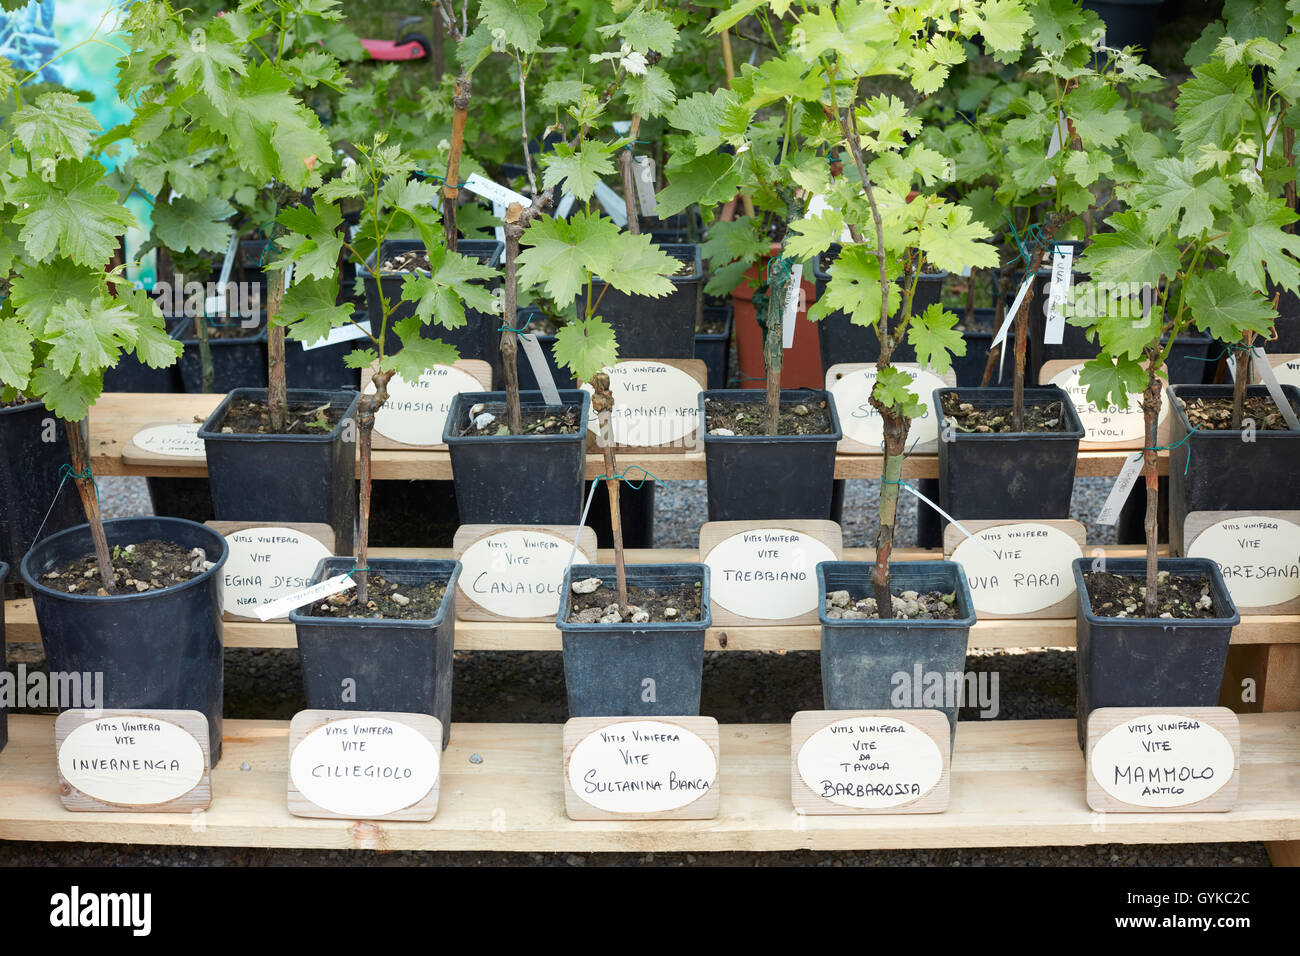 Types of Italian vine plants in pots with name tag Stock Photo